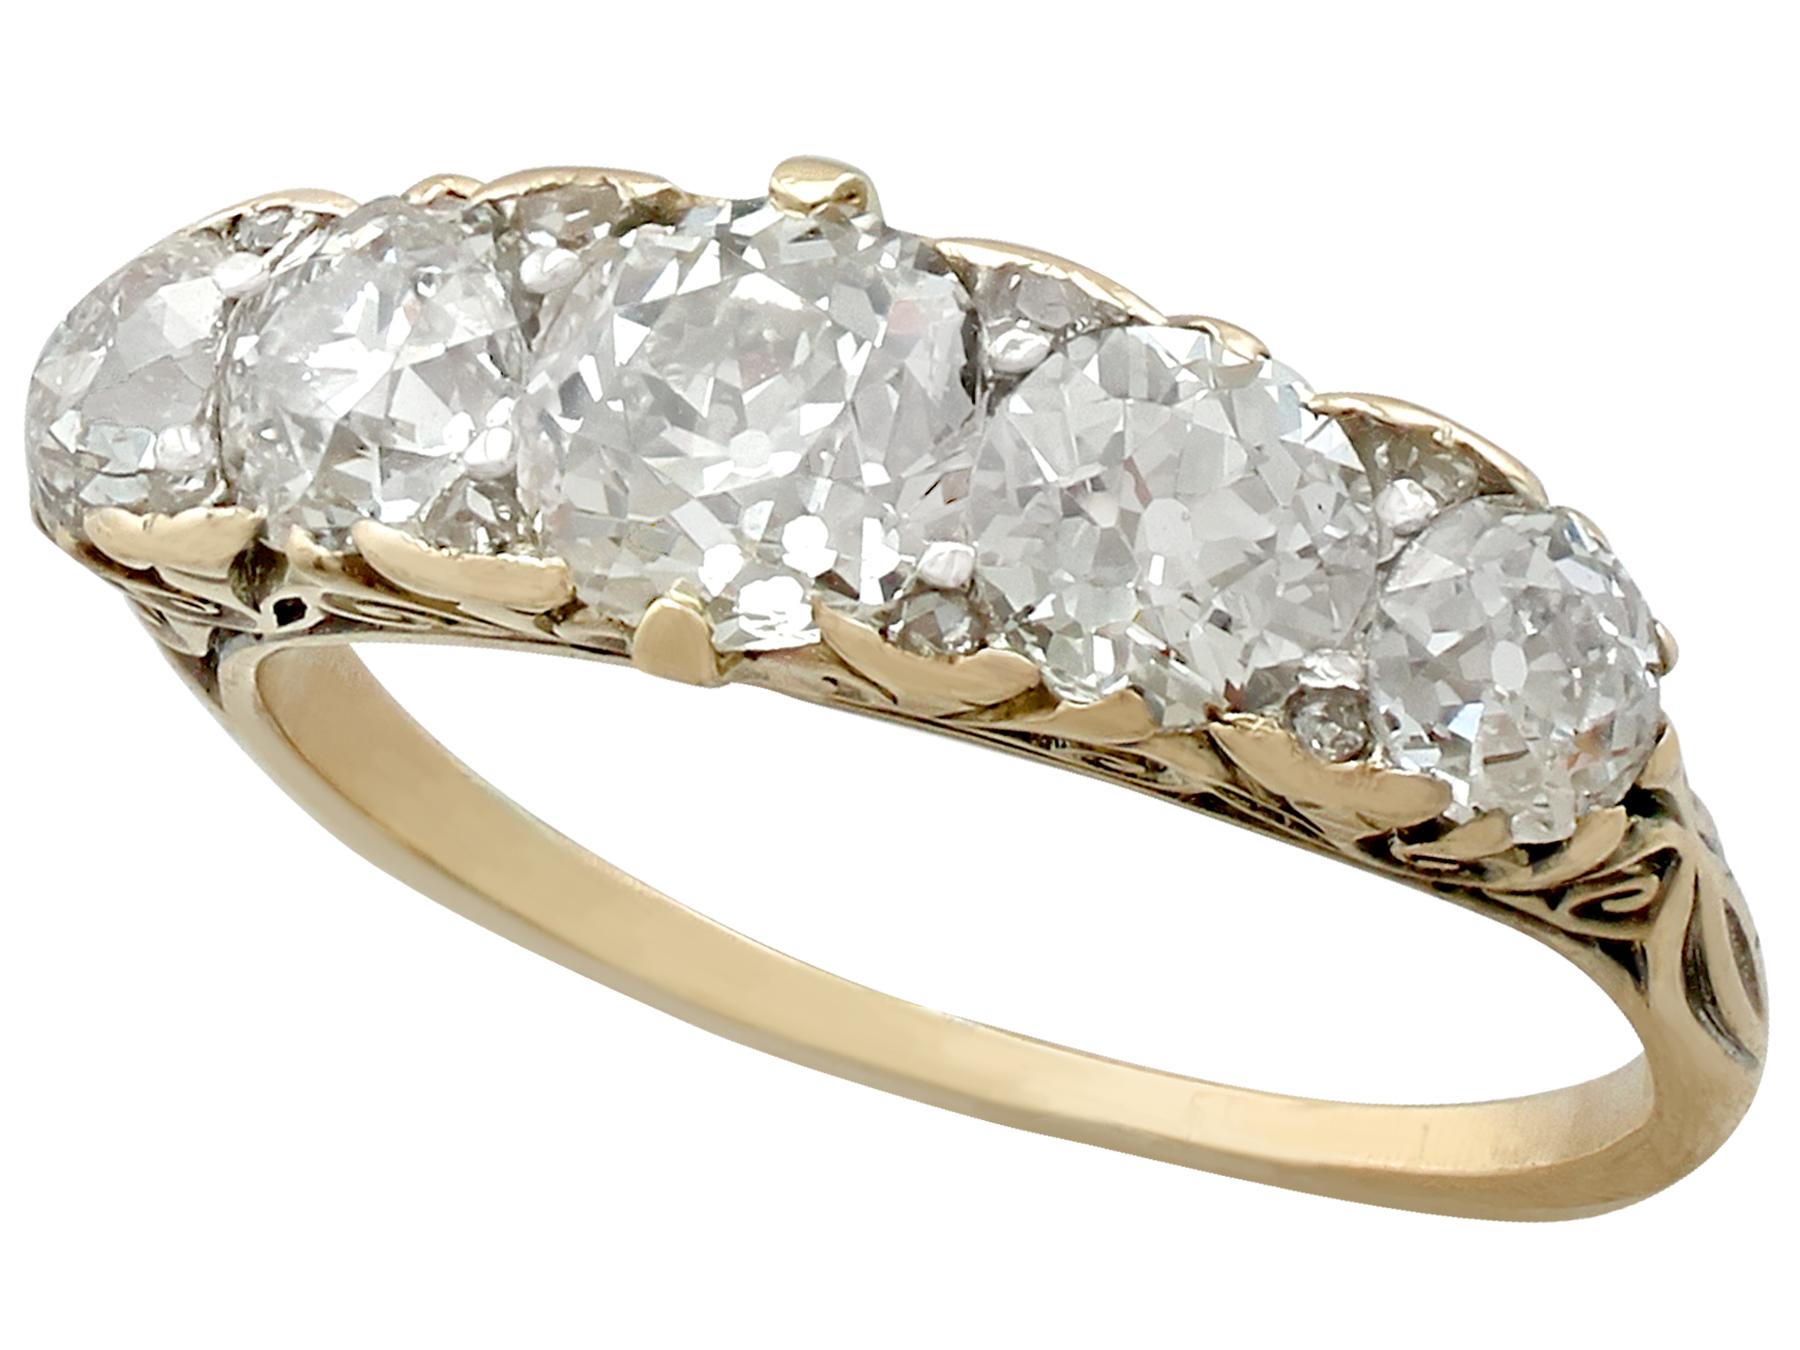 Women's or Men's 1900s Antique 2.44 Carat Diamond and Yellow Gold Five-Stone Ring